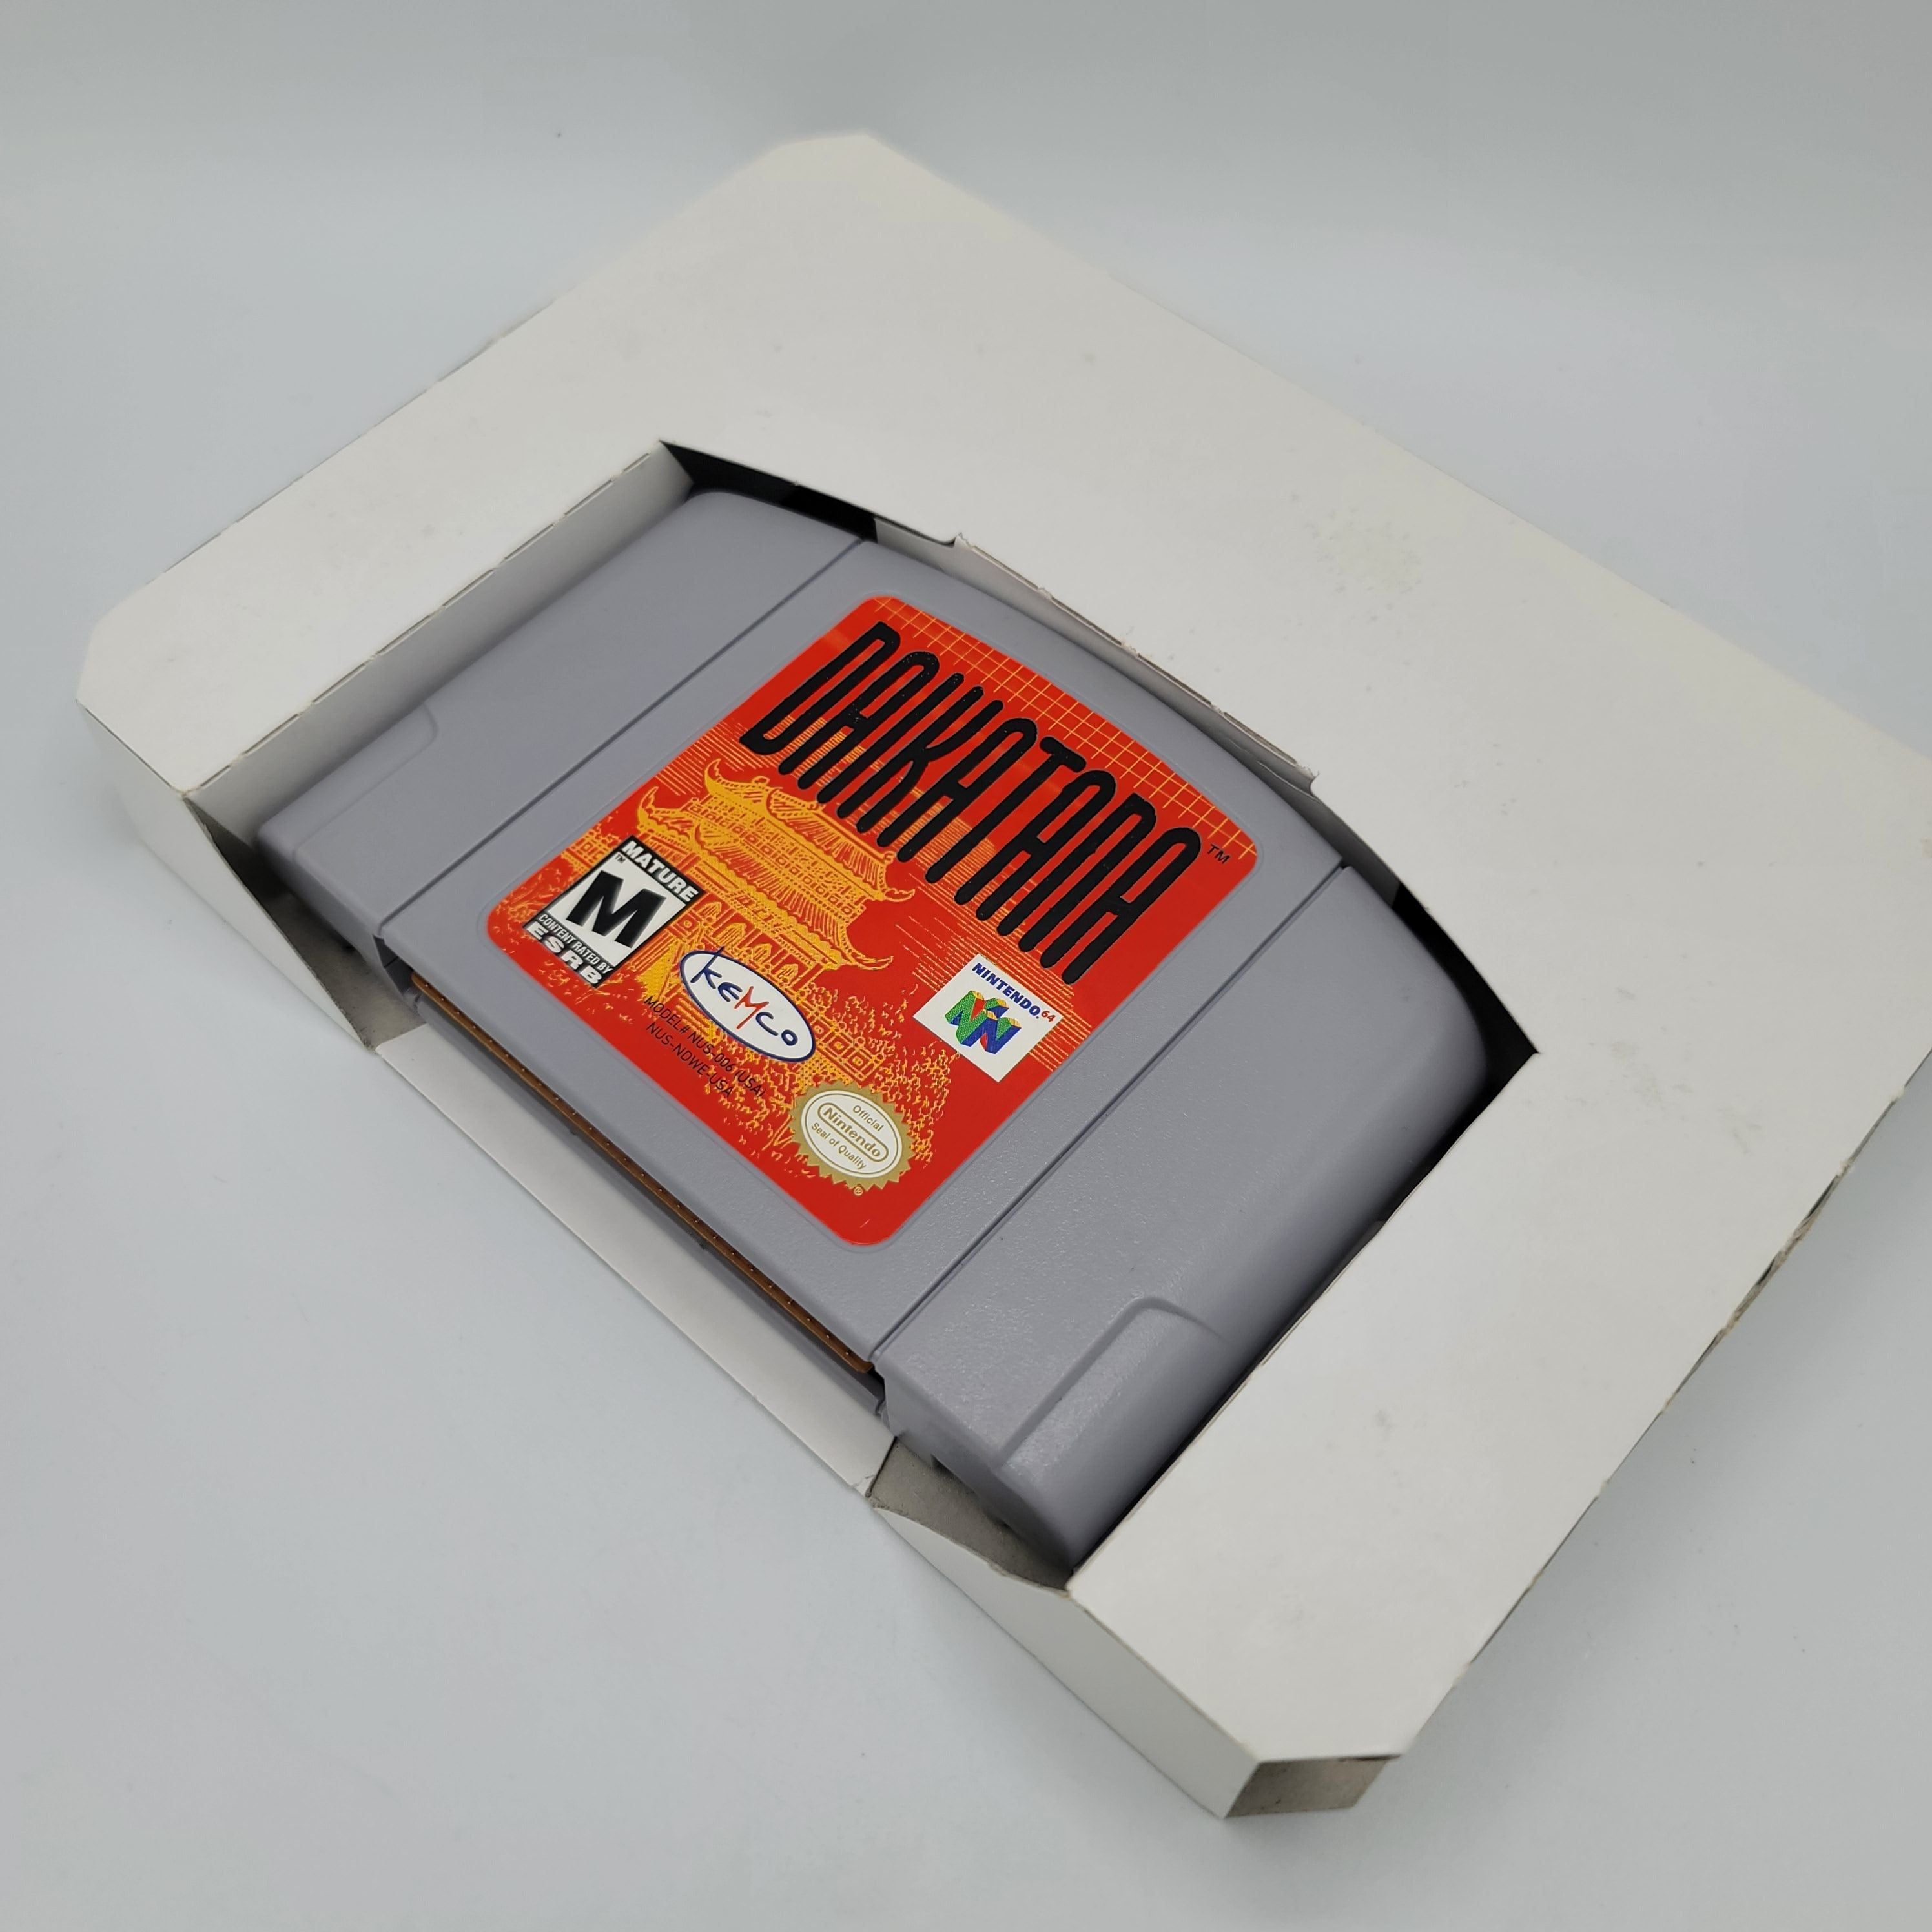 N64 - 007 The World is Not Enough (Complete in Box / B- / With Manual)